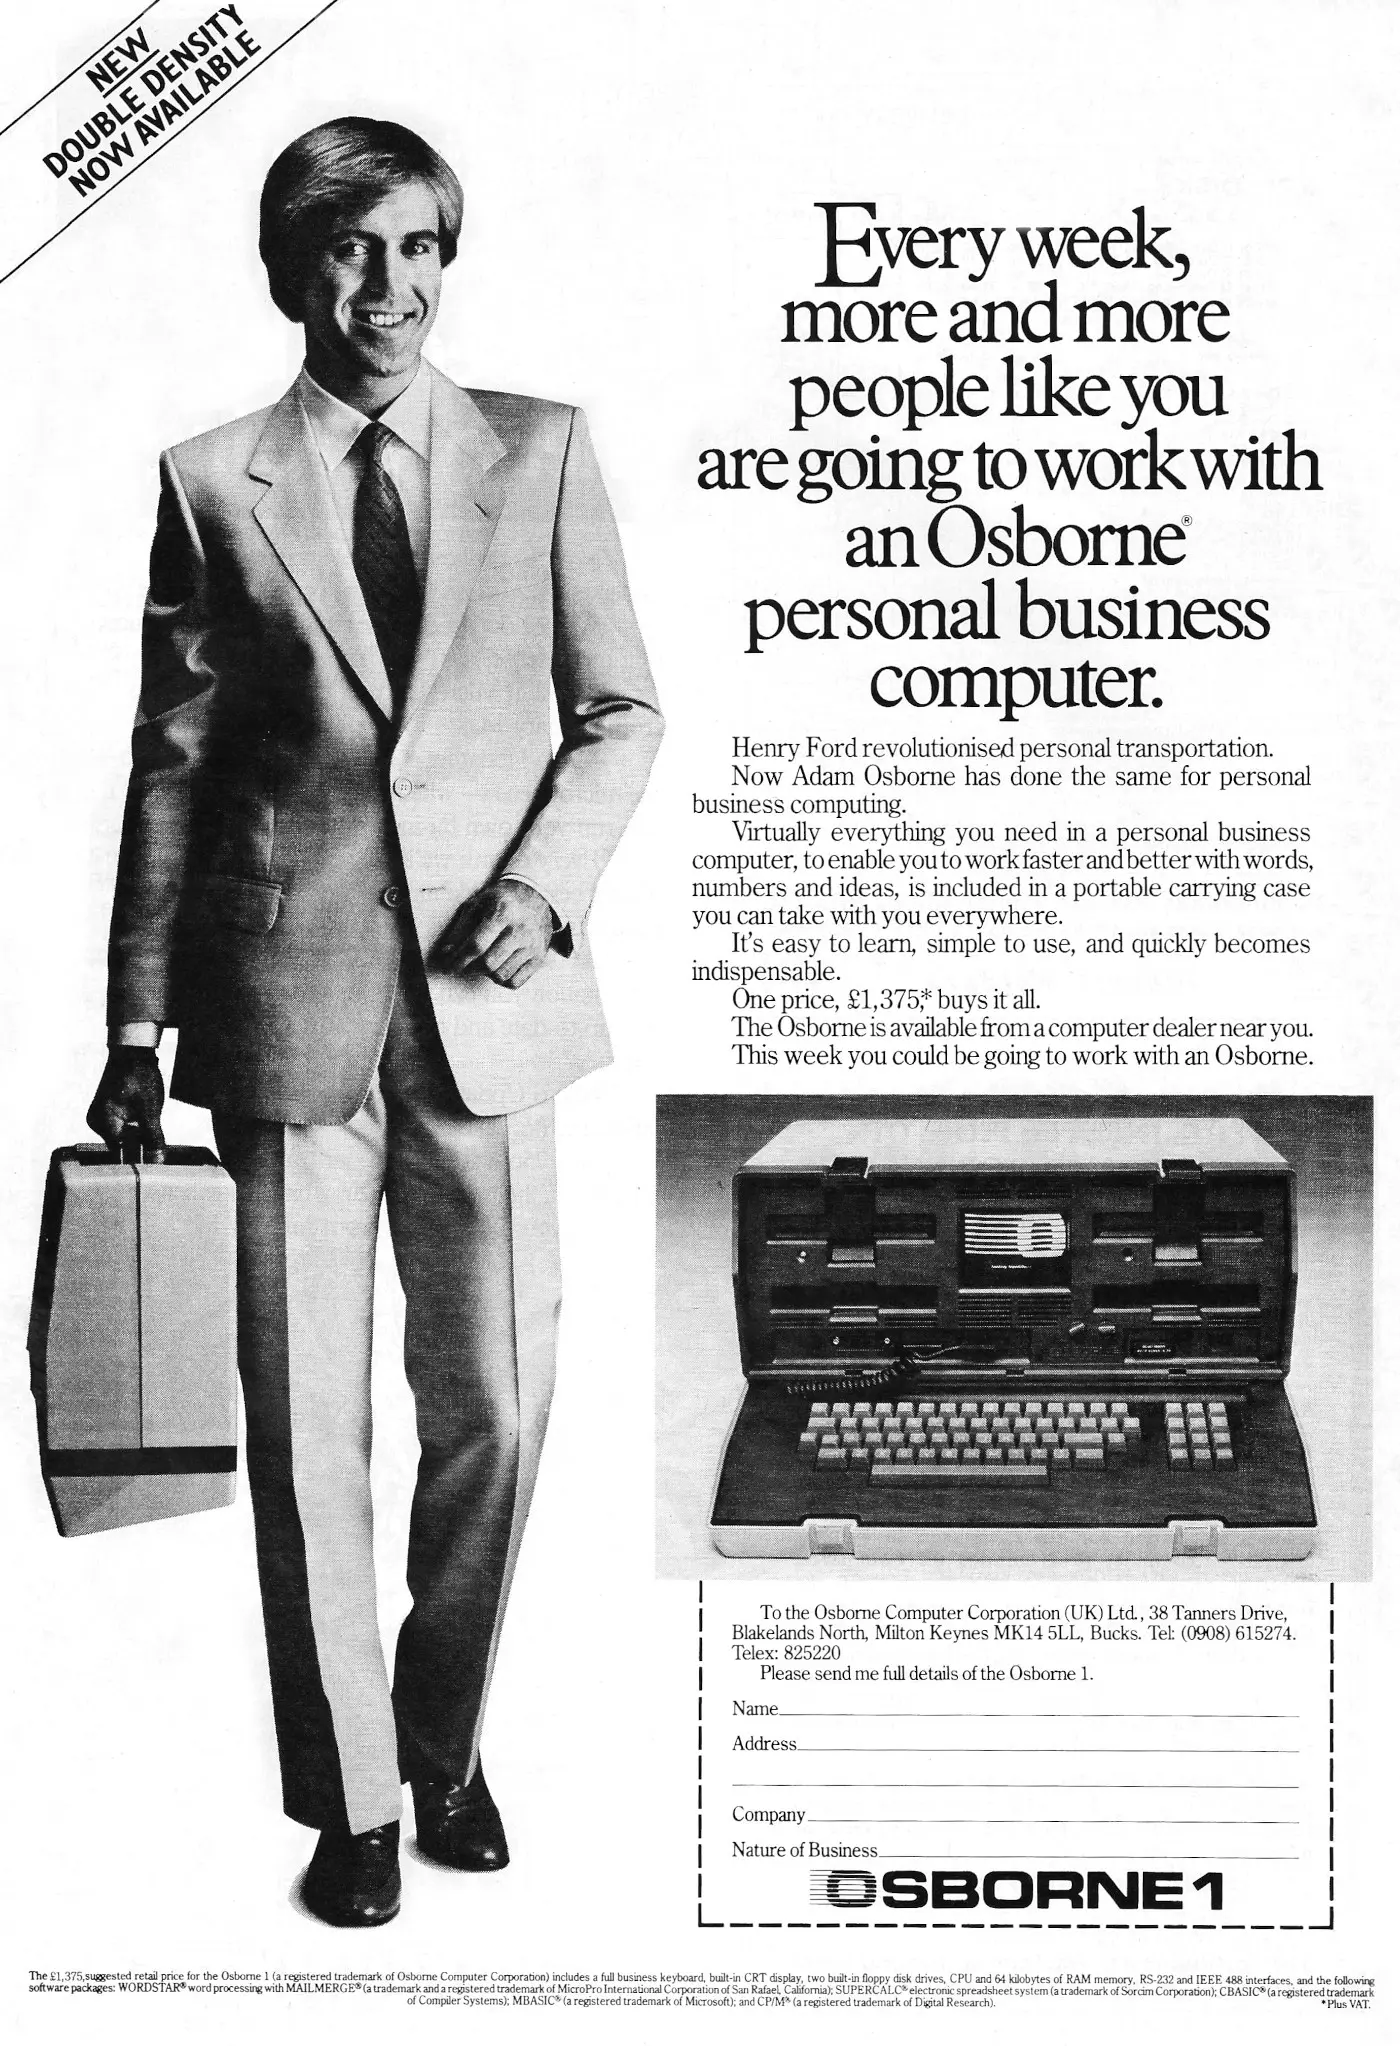 Osborne Advert: Every week, more and more people like you are going to work with an Osborne personal business computer, from Personal Computer News, January 1983